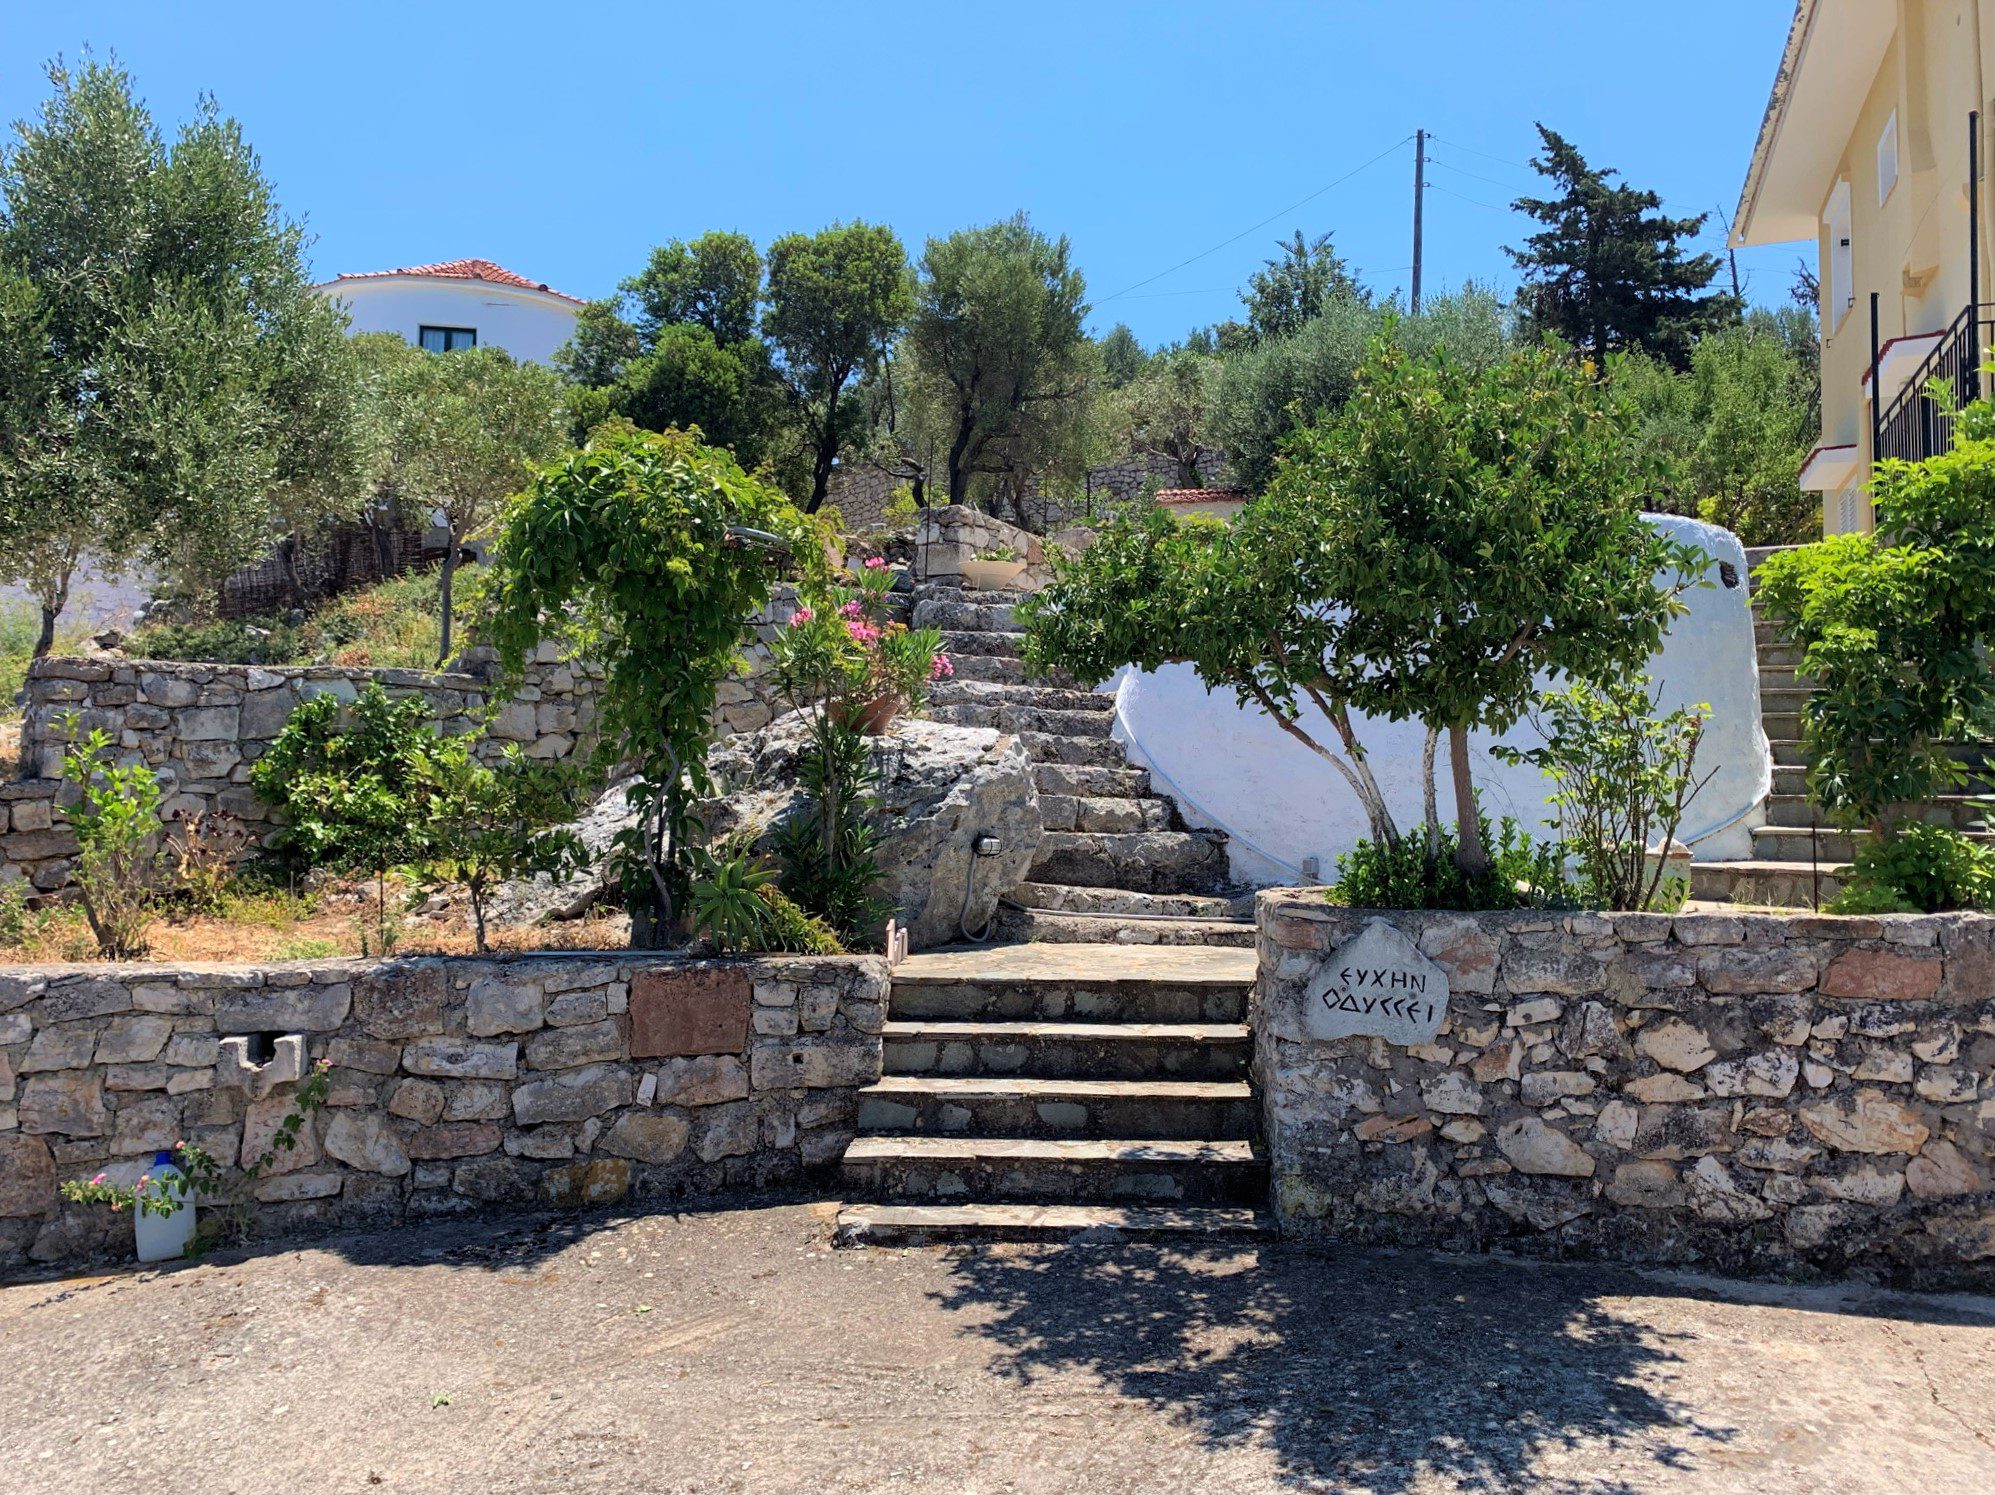 Entrance of holiday apartments for rent on Ithaca Greece, Vathi